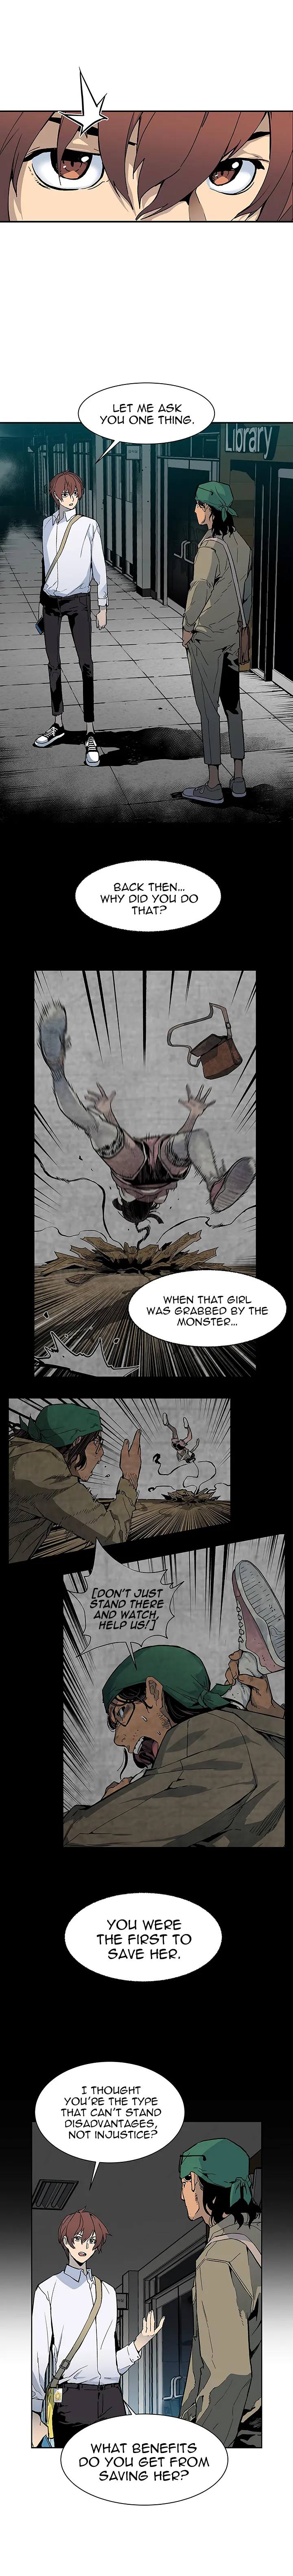 The Second Coming of Gluttony Chapter 12 - Page 12